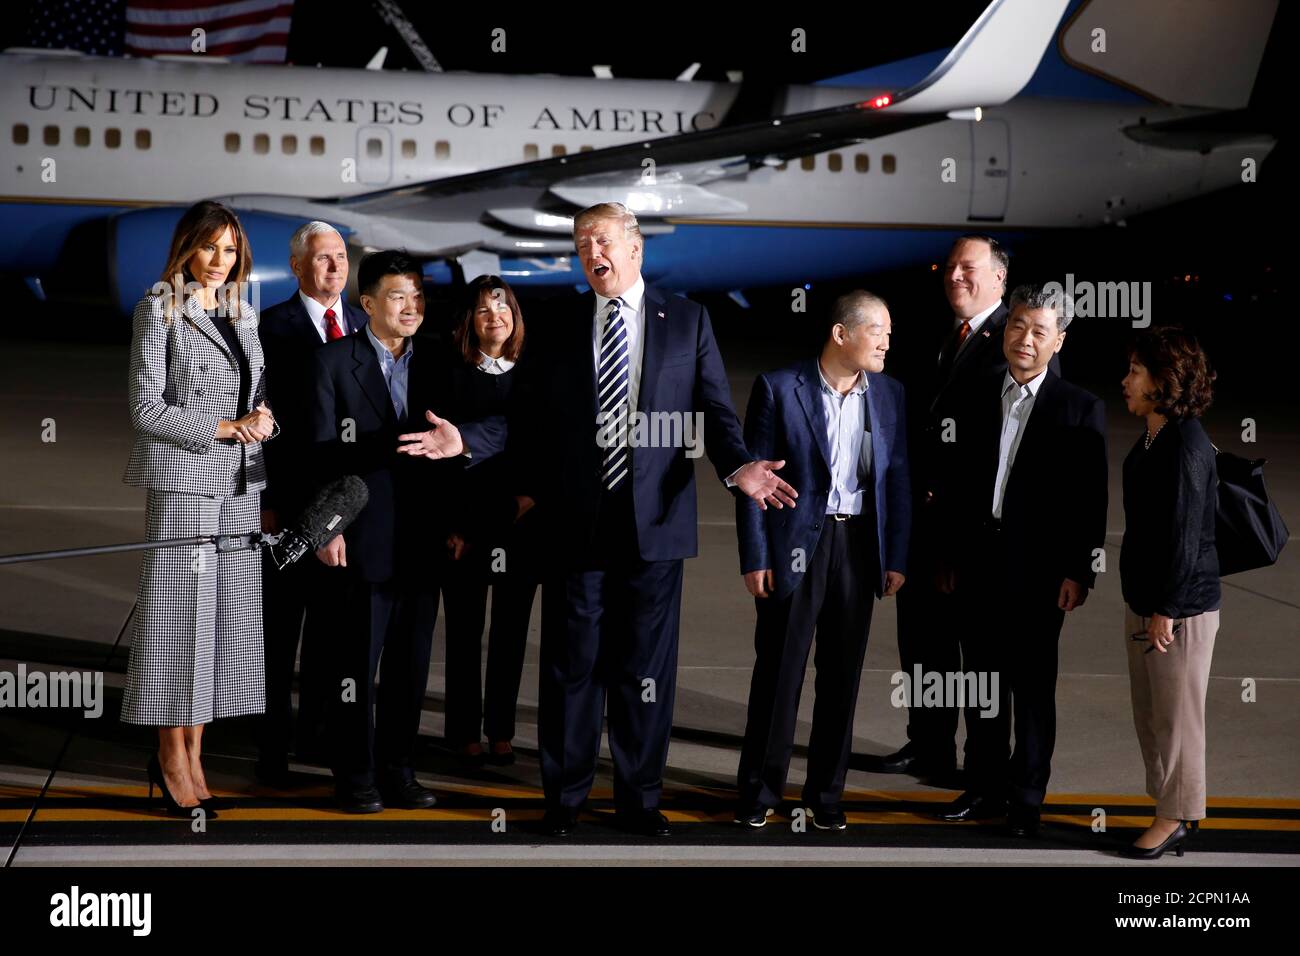 President Donald Trump talks to the media next to the three Americans formerly held hostage in North Korea, Tony Kim, Kim Hak-song and Kim Dong-chul, upon their arrival at Joint Base Andrews, Maryland, U.S., May 10, 2018. REUTERS/Joshua Roberts Stock Photo